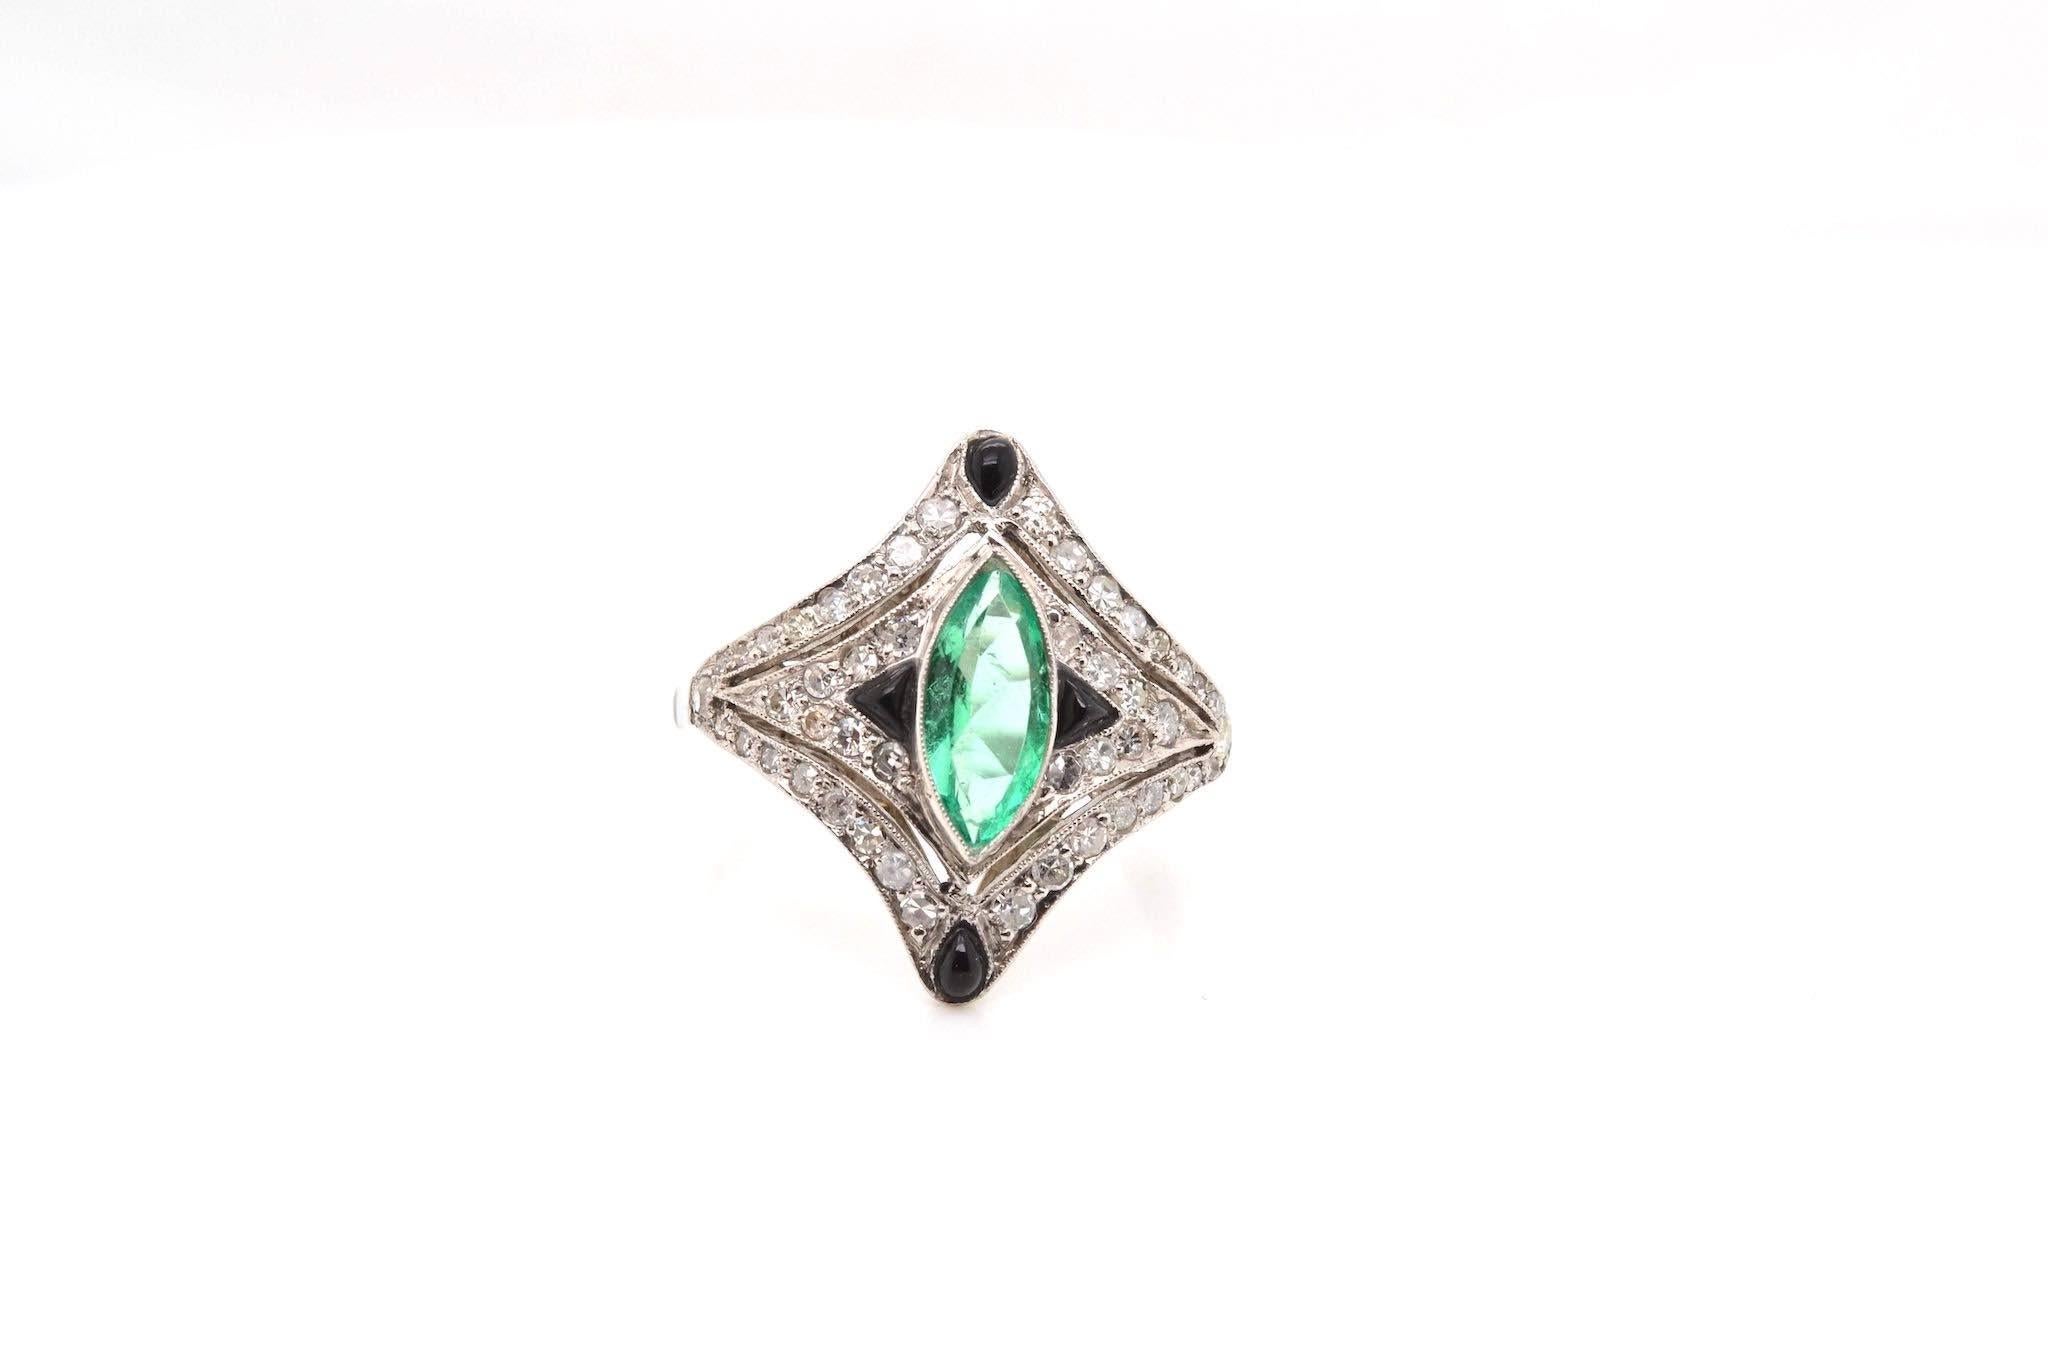 Stones: 1 emerald of 1 ct and diamond surround 1.20ct
Dimensions: 2.4cm x 2.1cm
Material: Platinum
Weight: 4.8g
Finger size: 56 (free sizing)
Certificate
Ref. : 24962